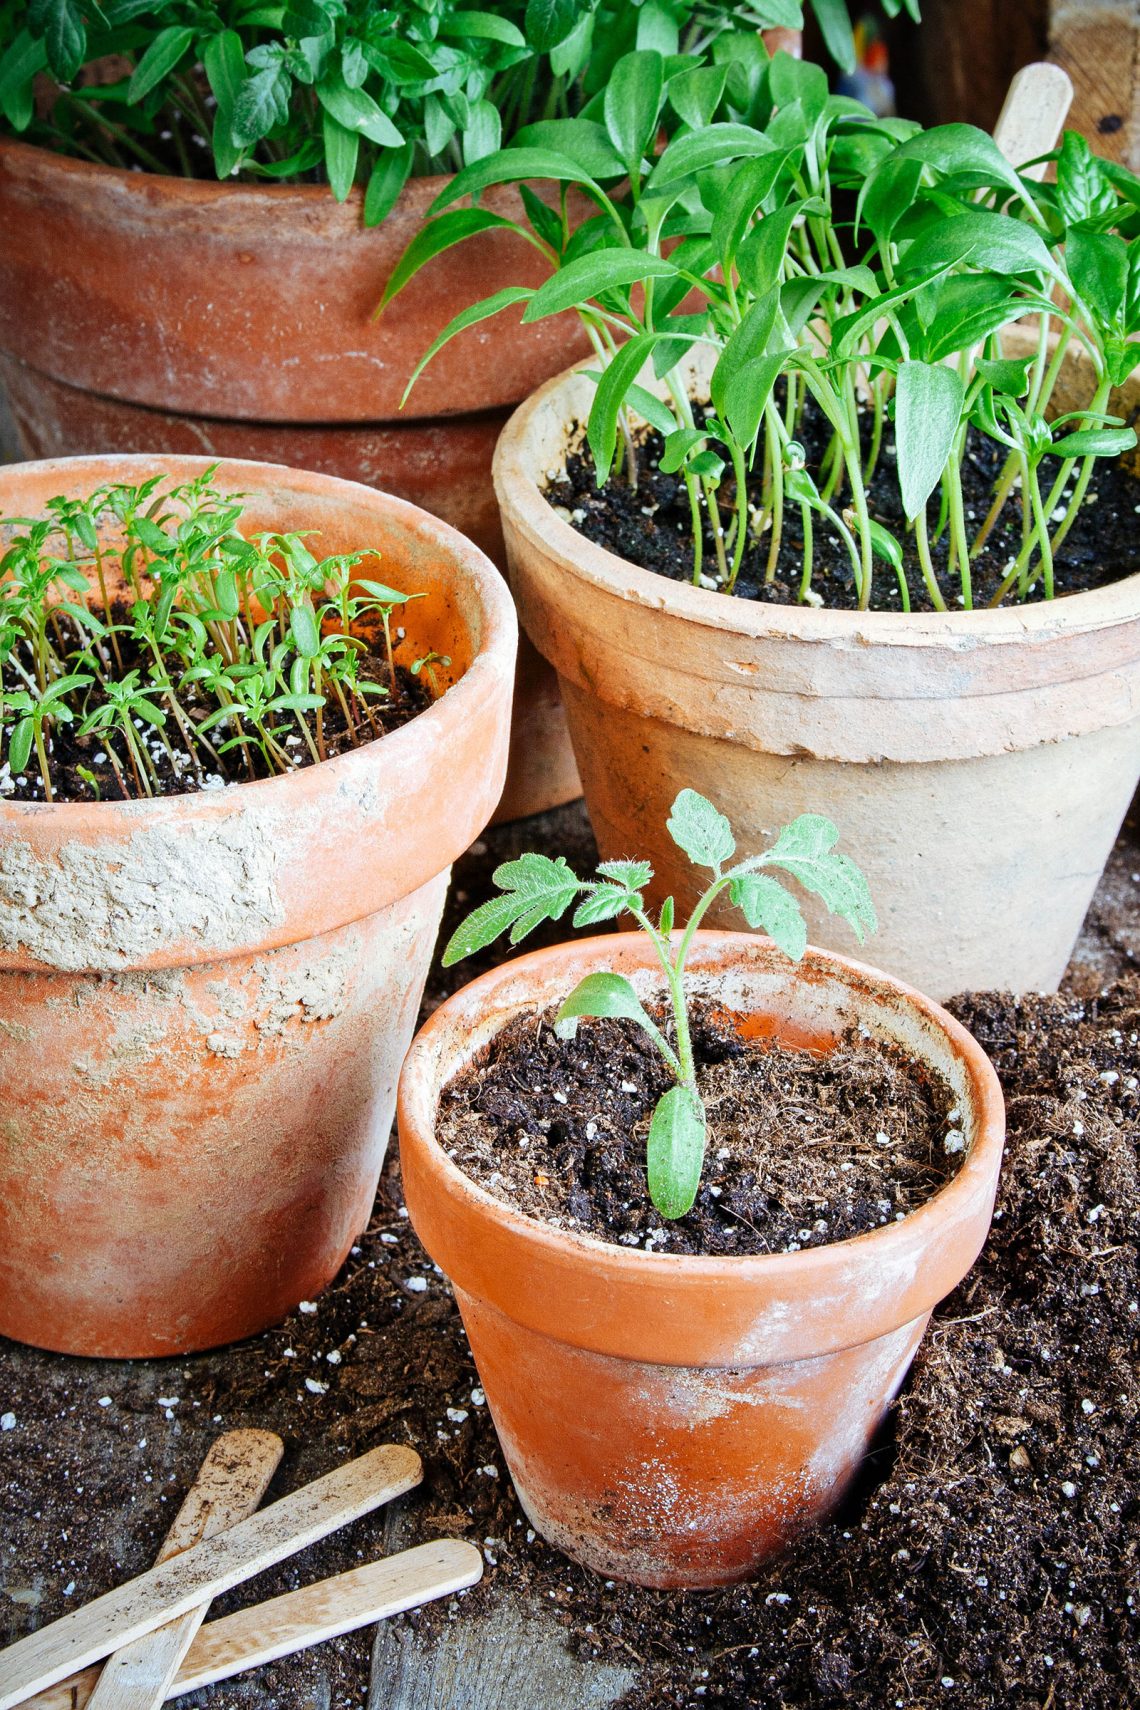 Easiest vegetables to grow indoors year round—no grow lights needed